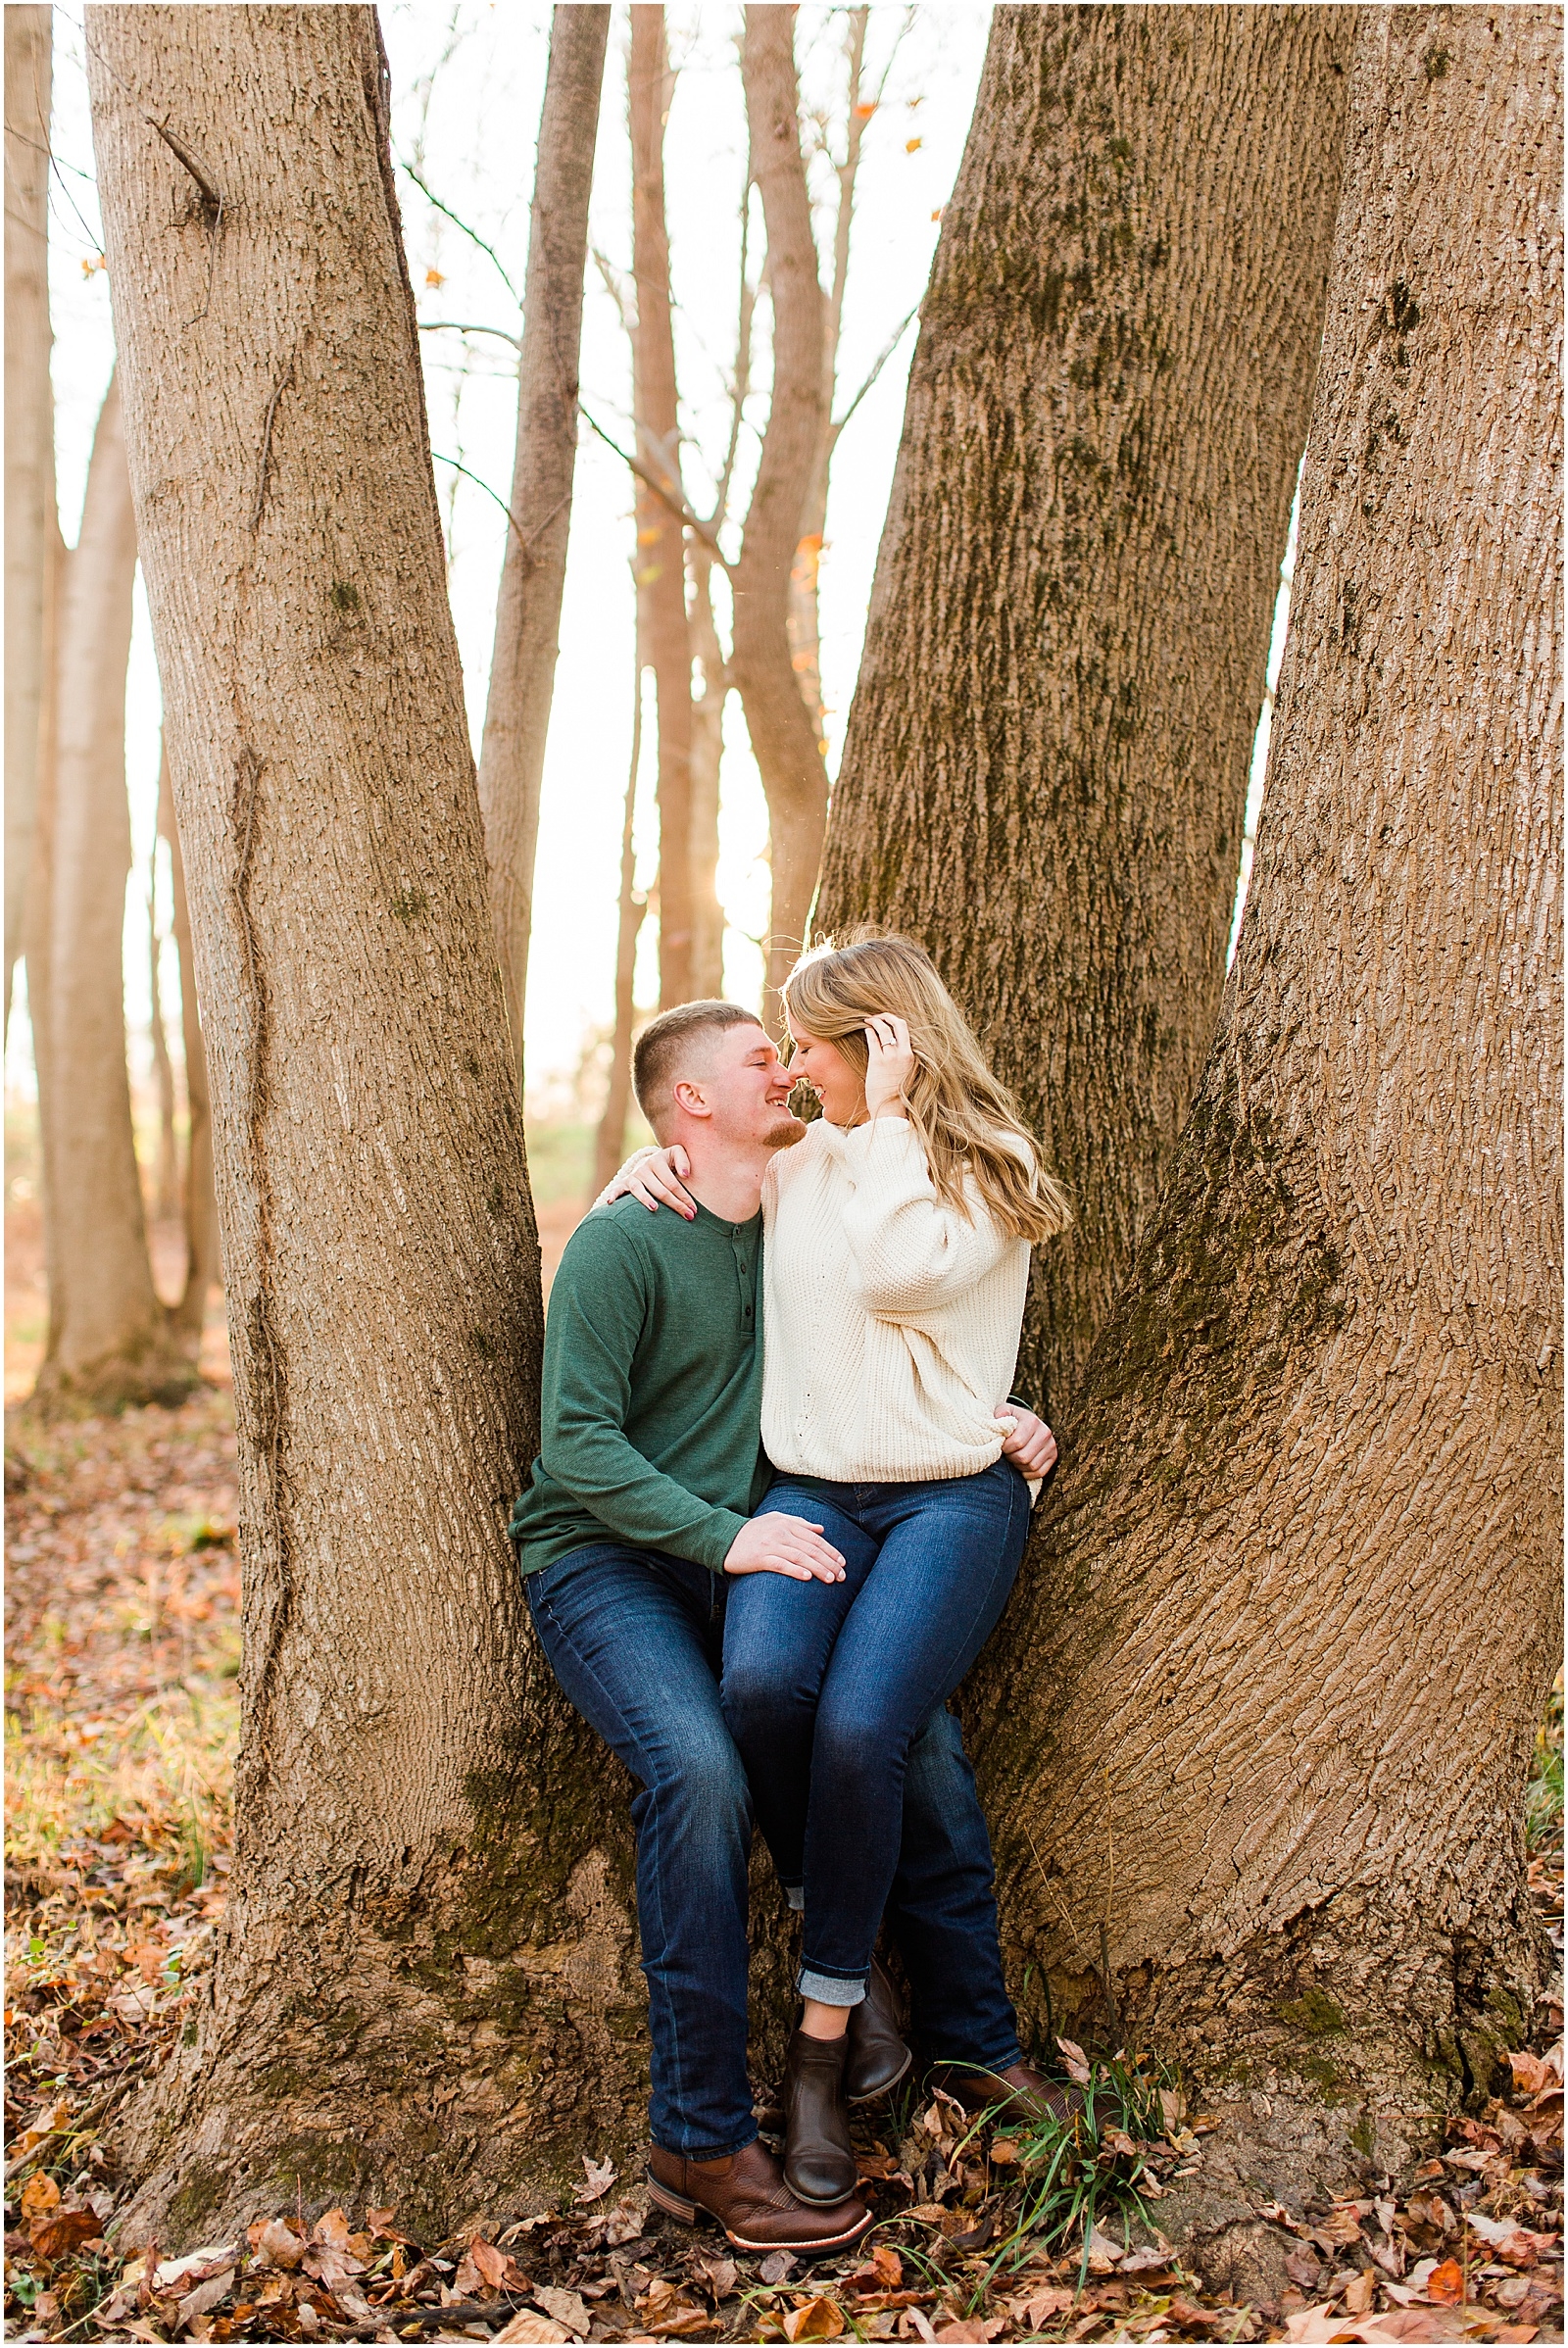 A Fall Southern Indiana Engagement Seesion | Cody and Hannah | Bret and Brandie Photography 033.jpg